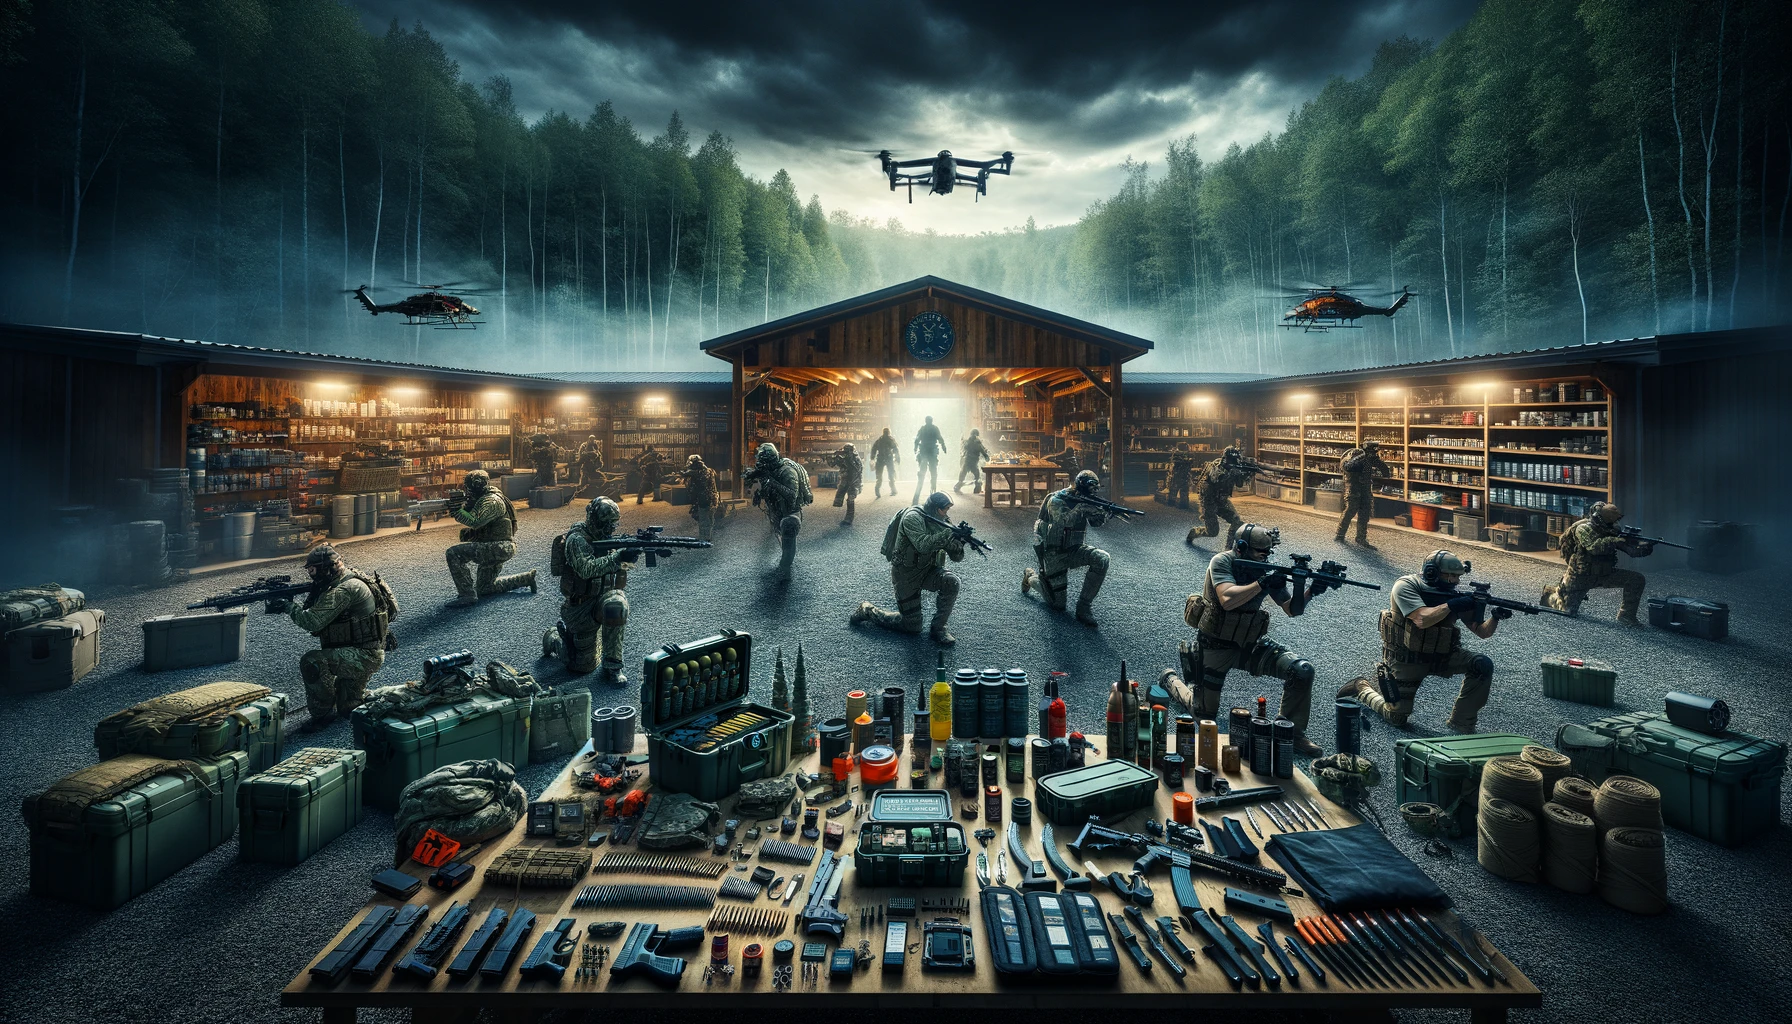 Intense tactical training scene in a forested facility, with preppers engaged in hand-to-hand combat, firearms marksmanship, and survival drills. The background showcases an advanced stockpile of ammunition, tactical gear, non-perishable foods, and medical kits, emphasizing readiness, focus, and the use of technology like night vision goggles and drones for modern prepping practices